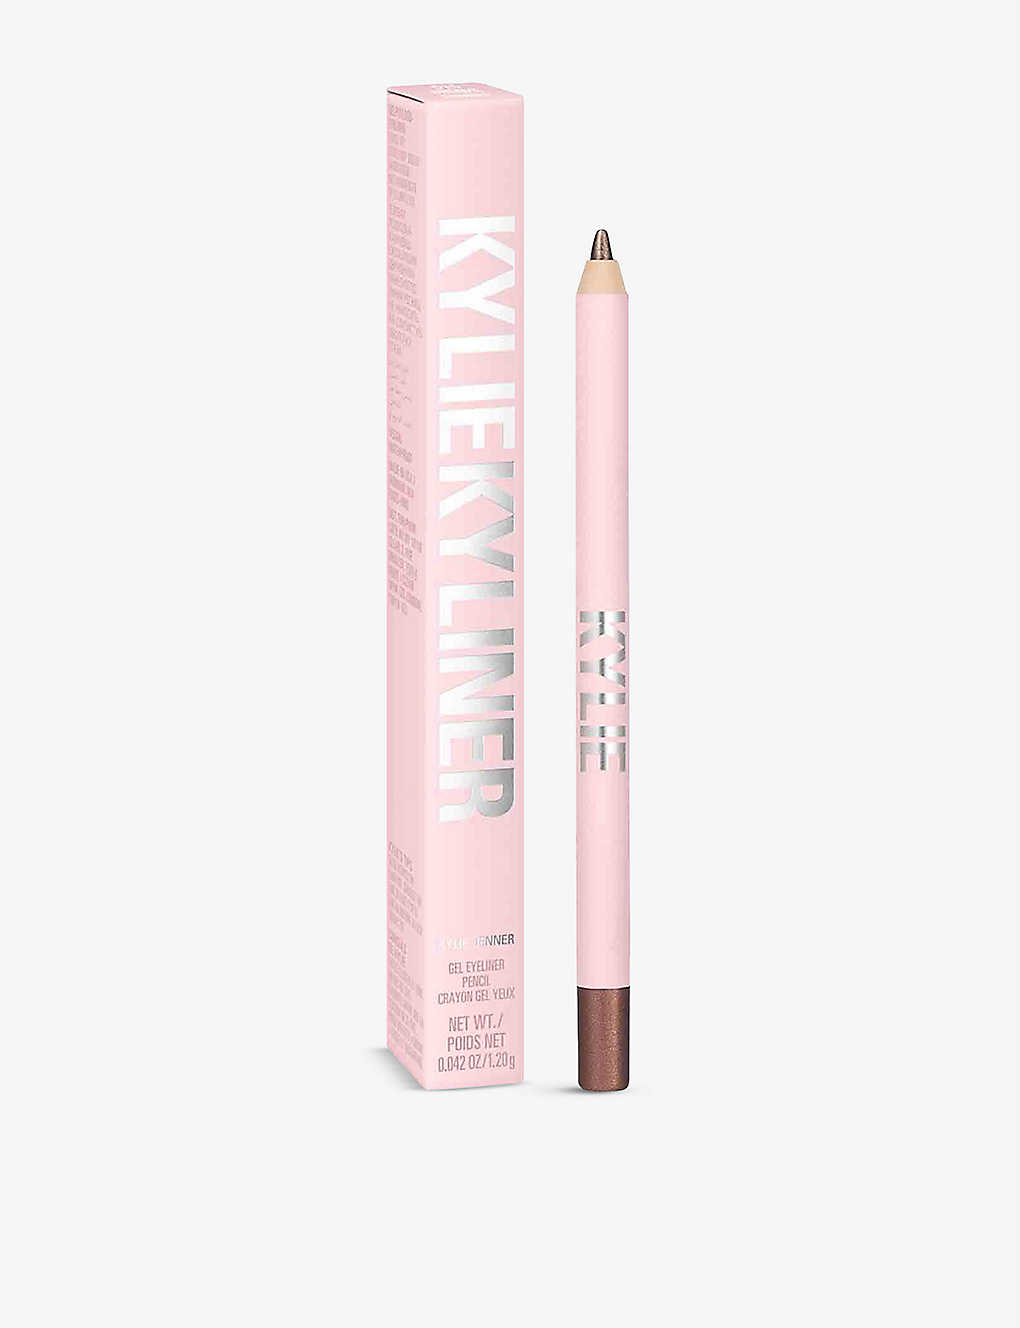 Kylie By Kylie Jenner Kyliner Gel Pencil 4.25g In 015 Shimmery Bronze